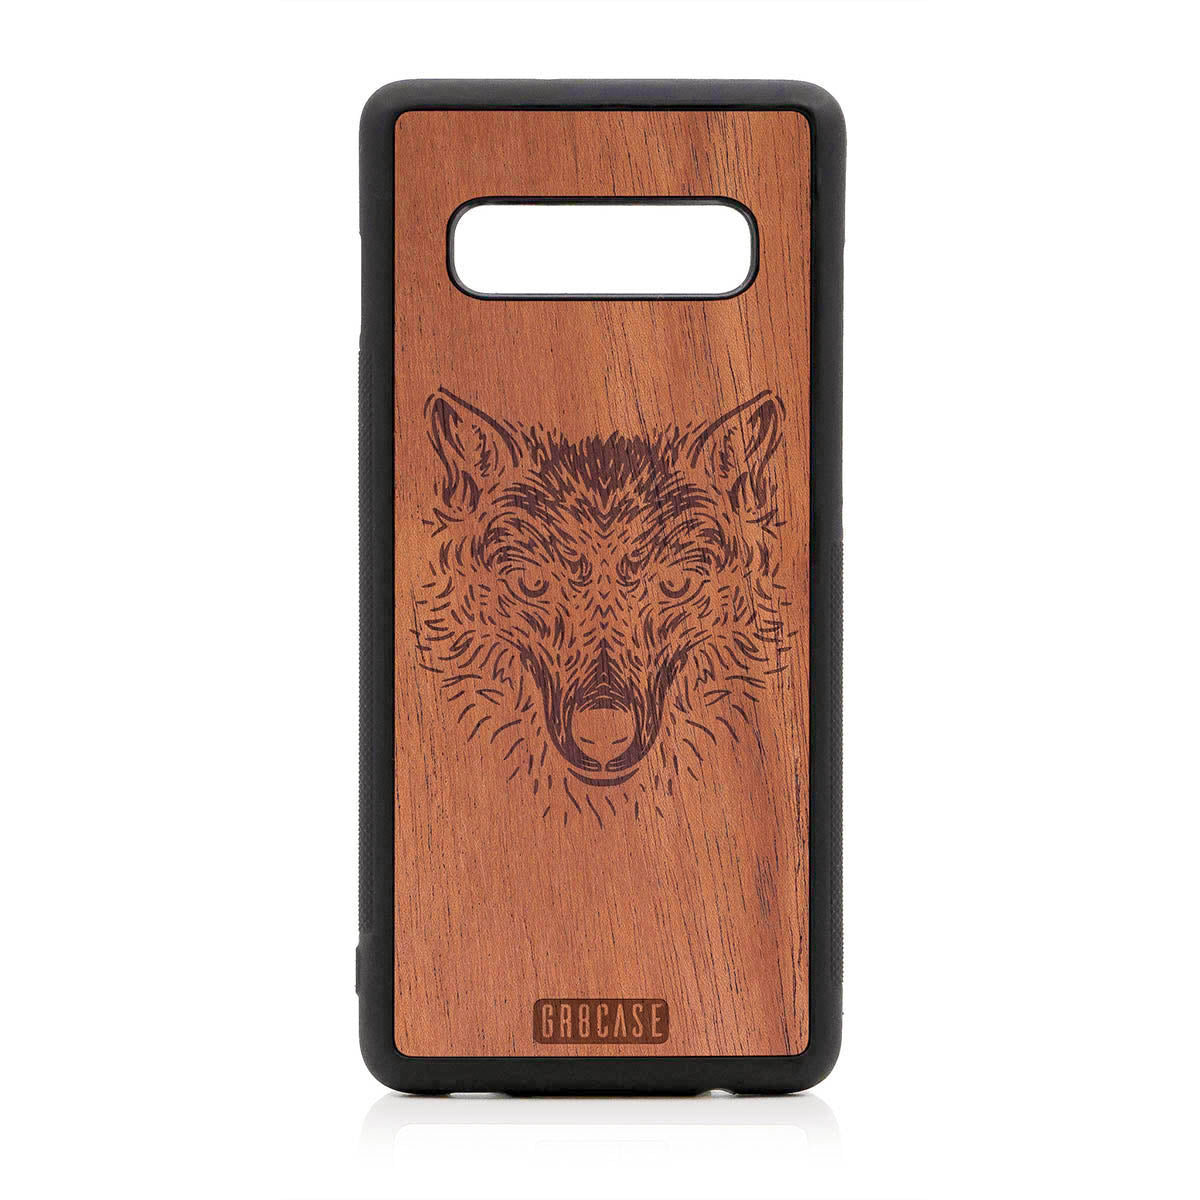 Furry Wolf Design Wood Case For Samsung Galaxy S10 Plus